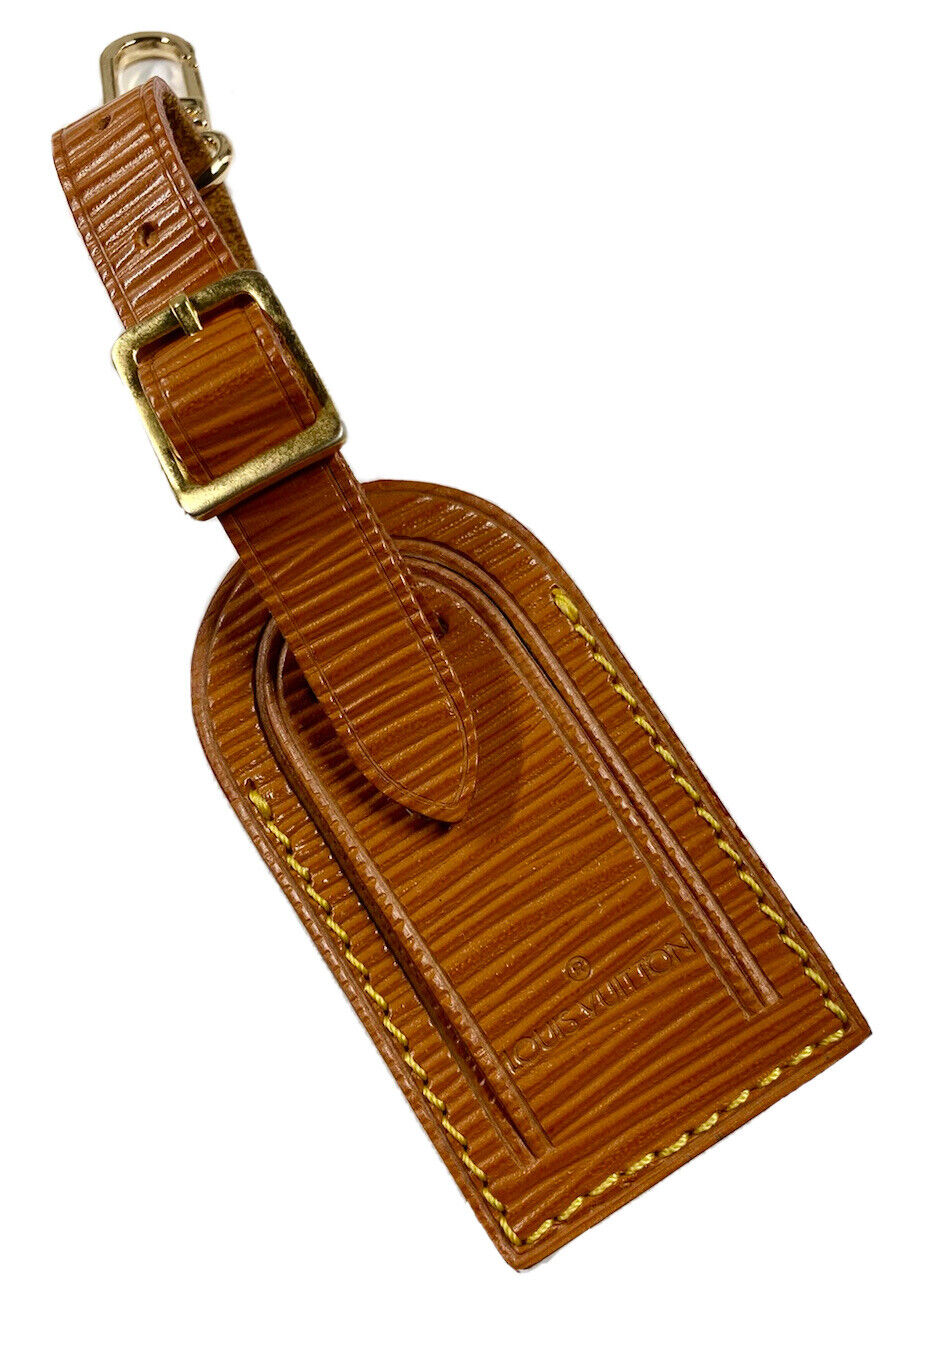 Louis Vuitton Epi Leather Luggage Tag Canelle Small France- Rare Find 🎊